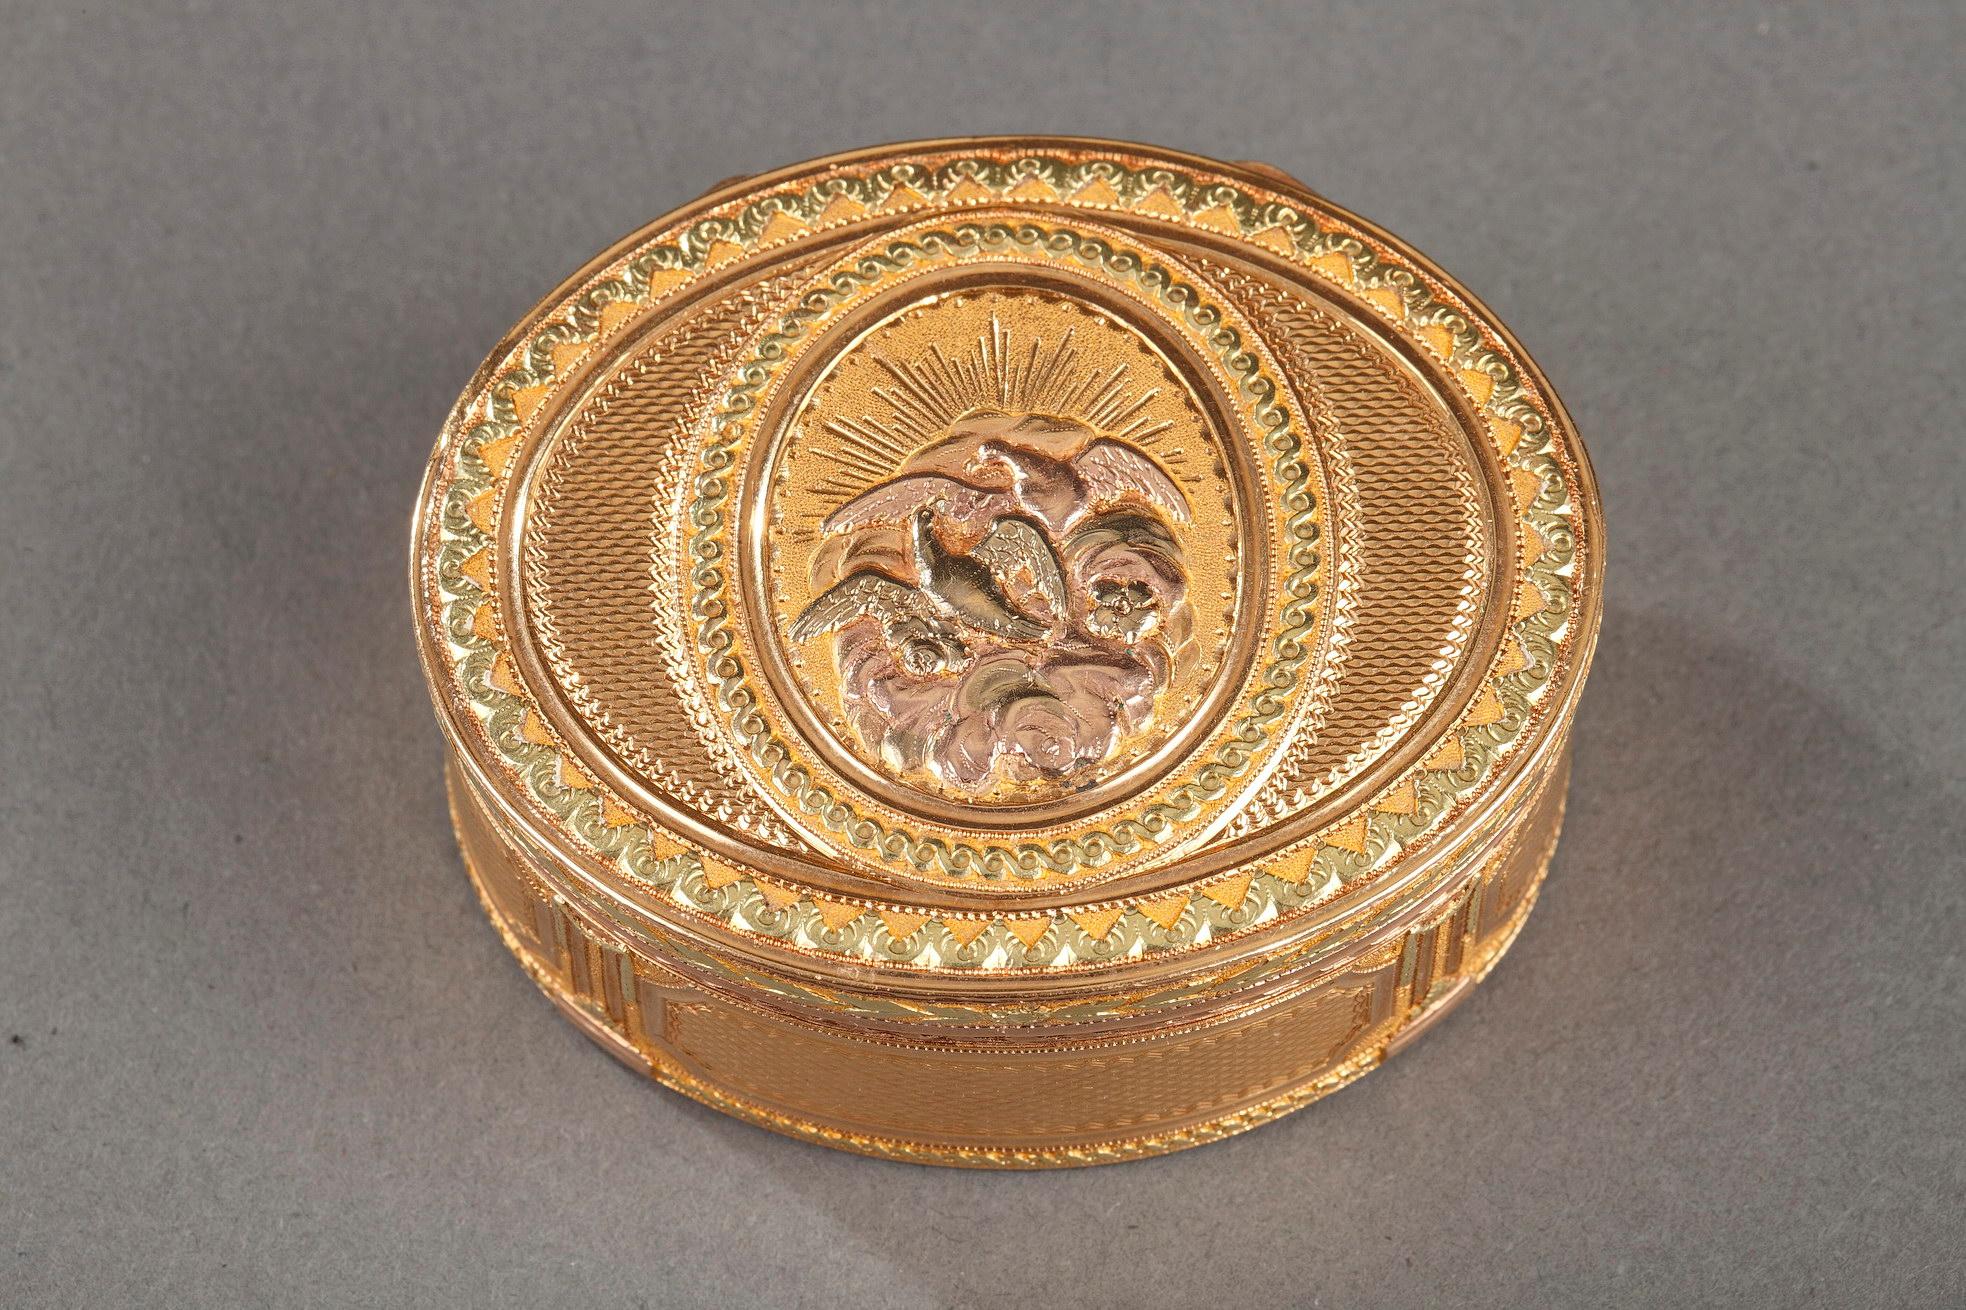 Oval snuff box featuring green, yellow, and pink gold. The hinged lid is decorated with a central medallion featuring two doves in a cloud with a rising sun behind them. The doves, a symbol of love and of Venus in particular, are set on a matte gold